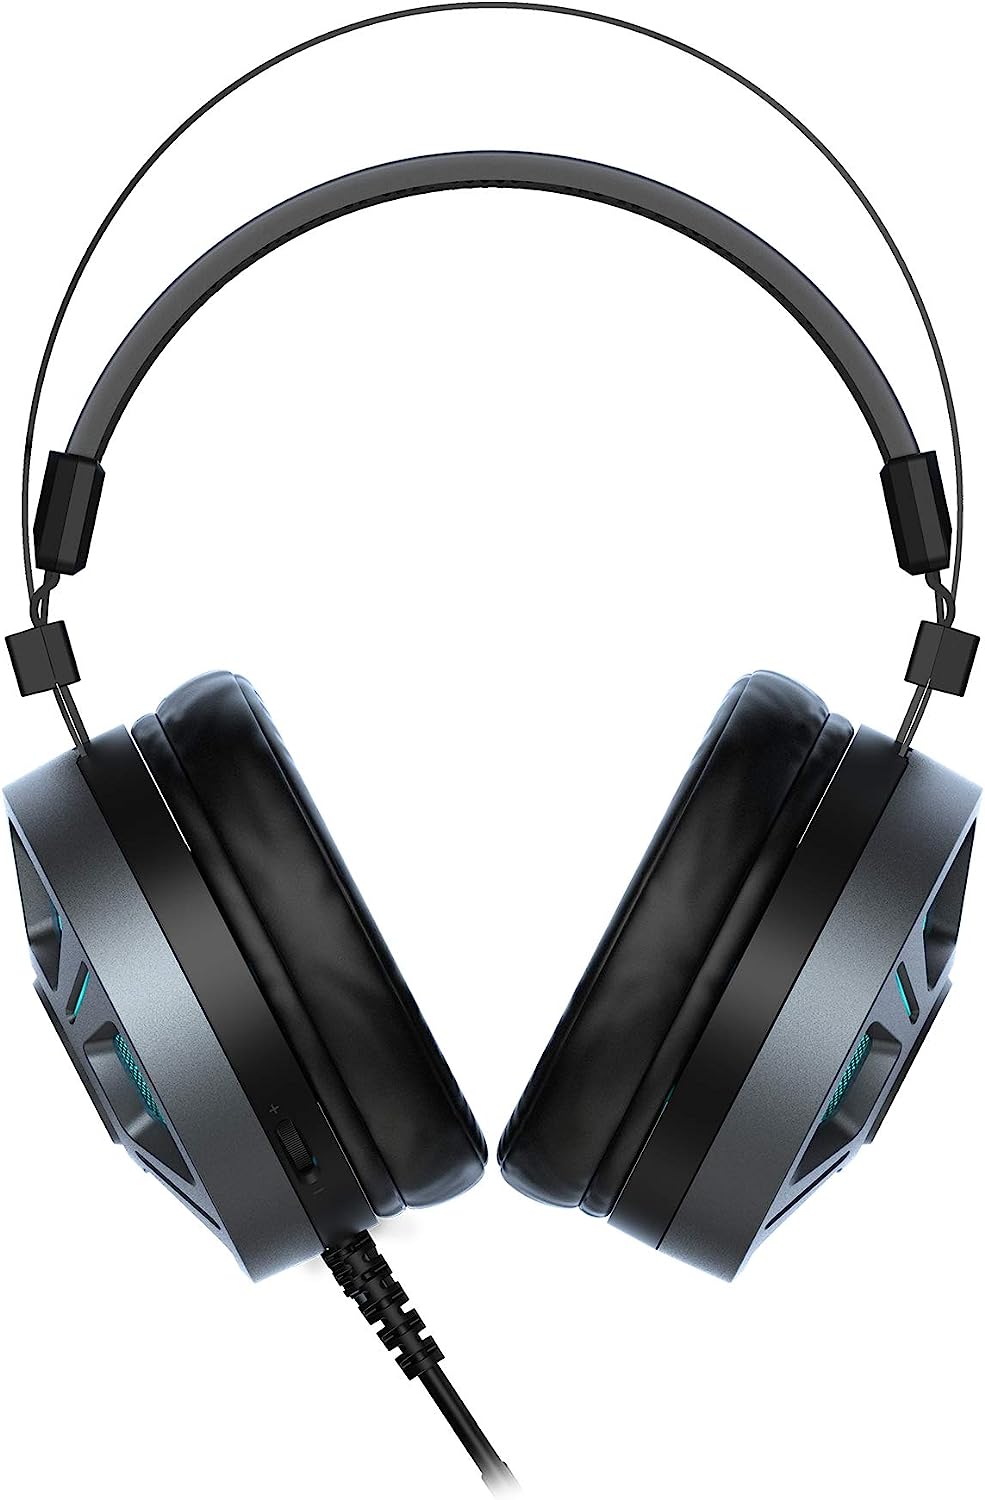 Rapoo Vpro Wired Gaming Headset in Bahrain - Gaming Accessories